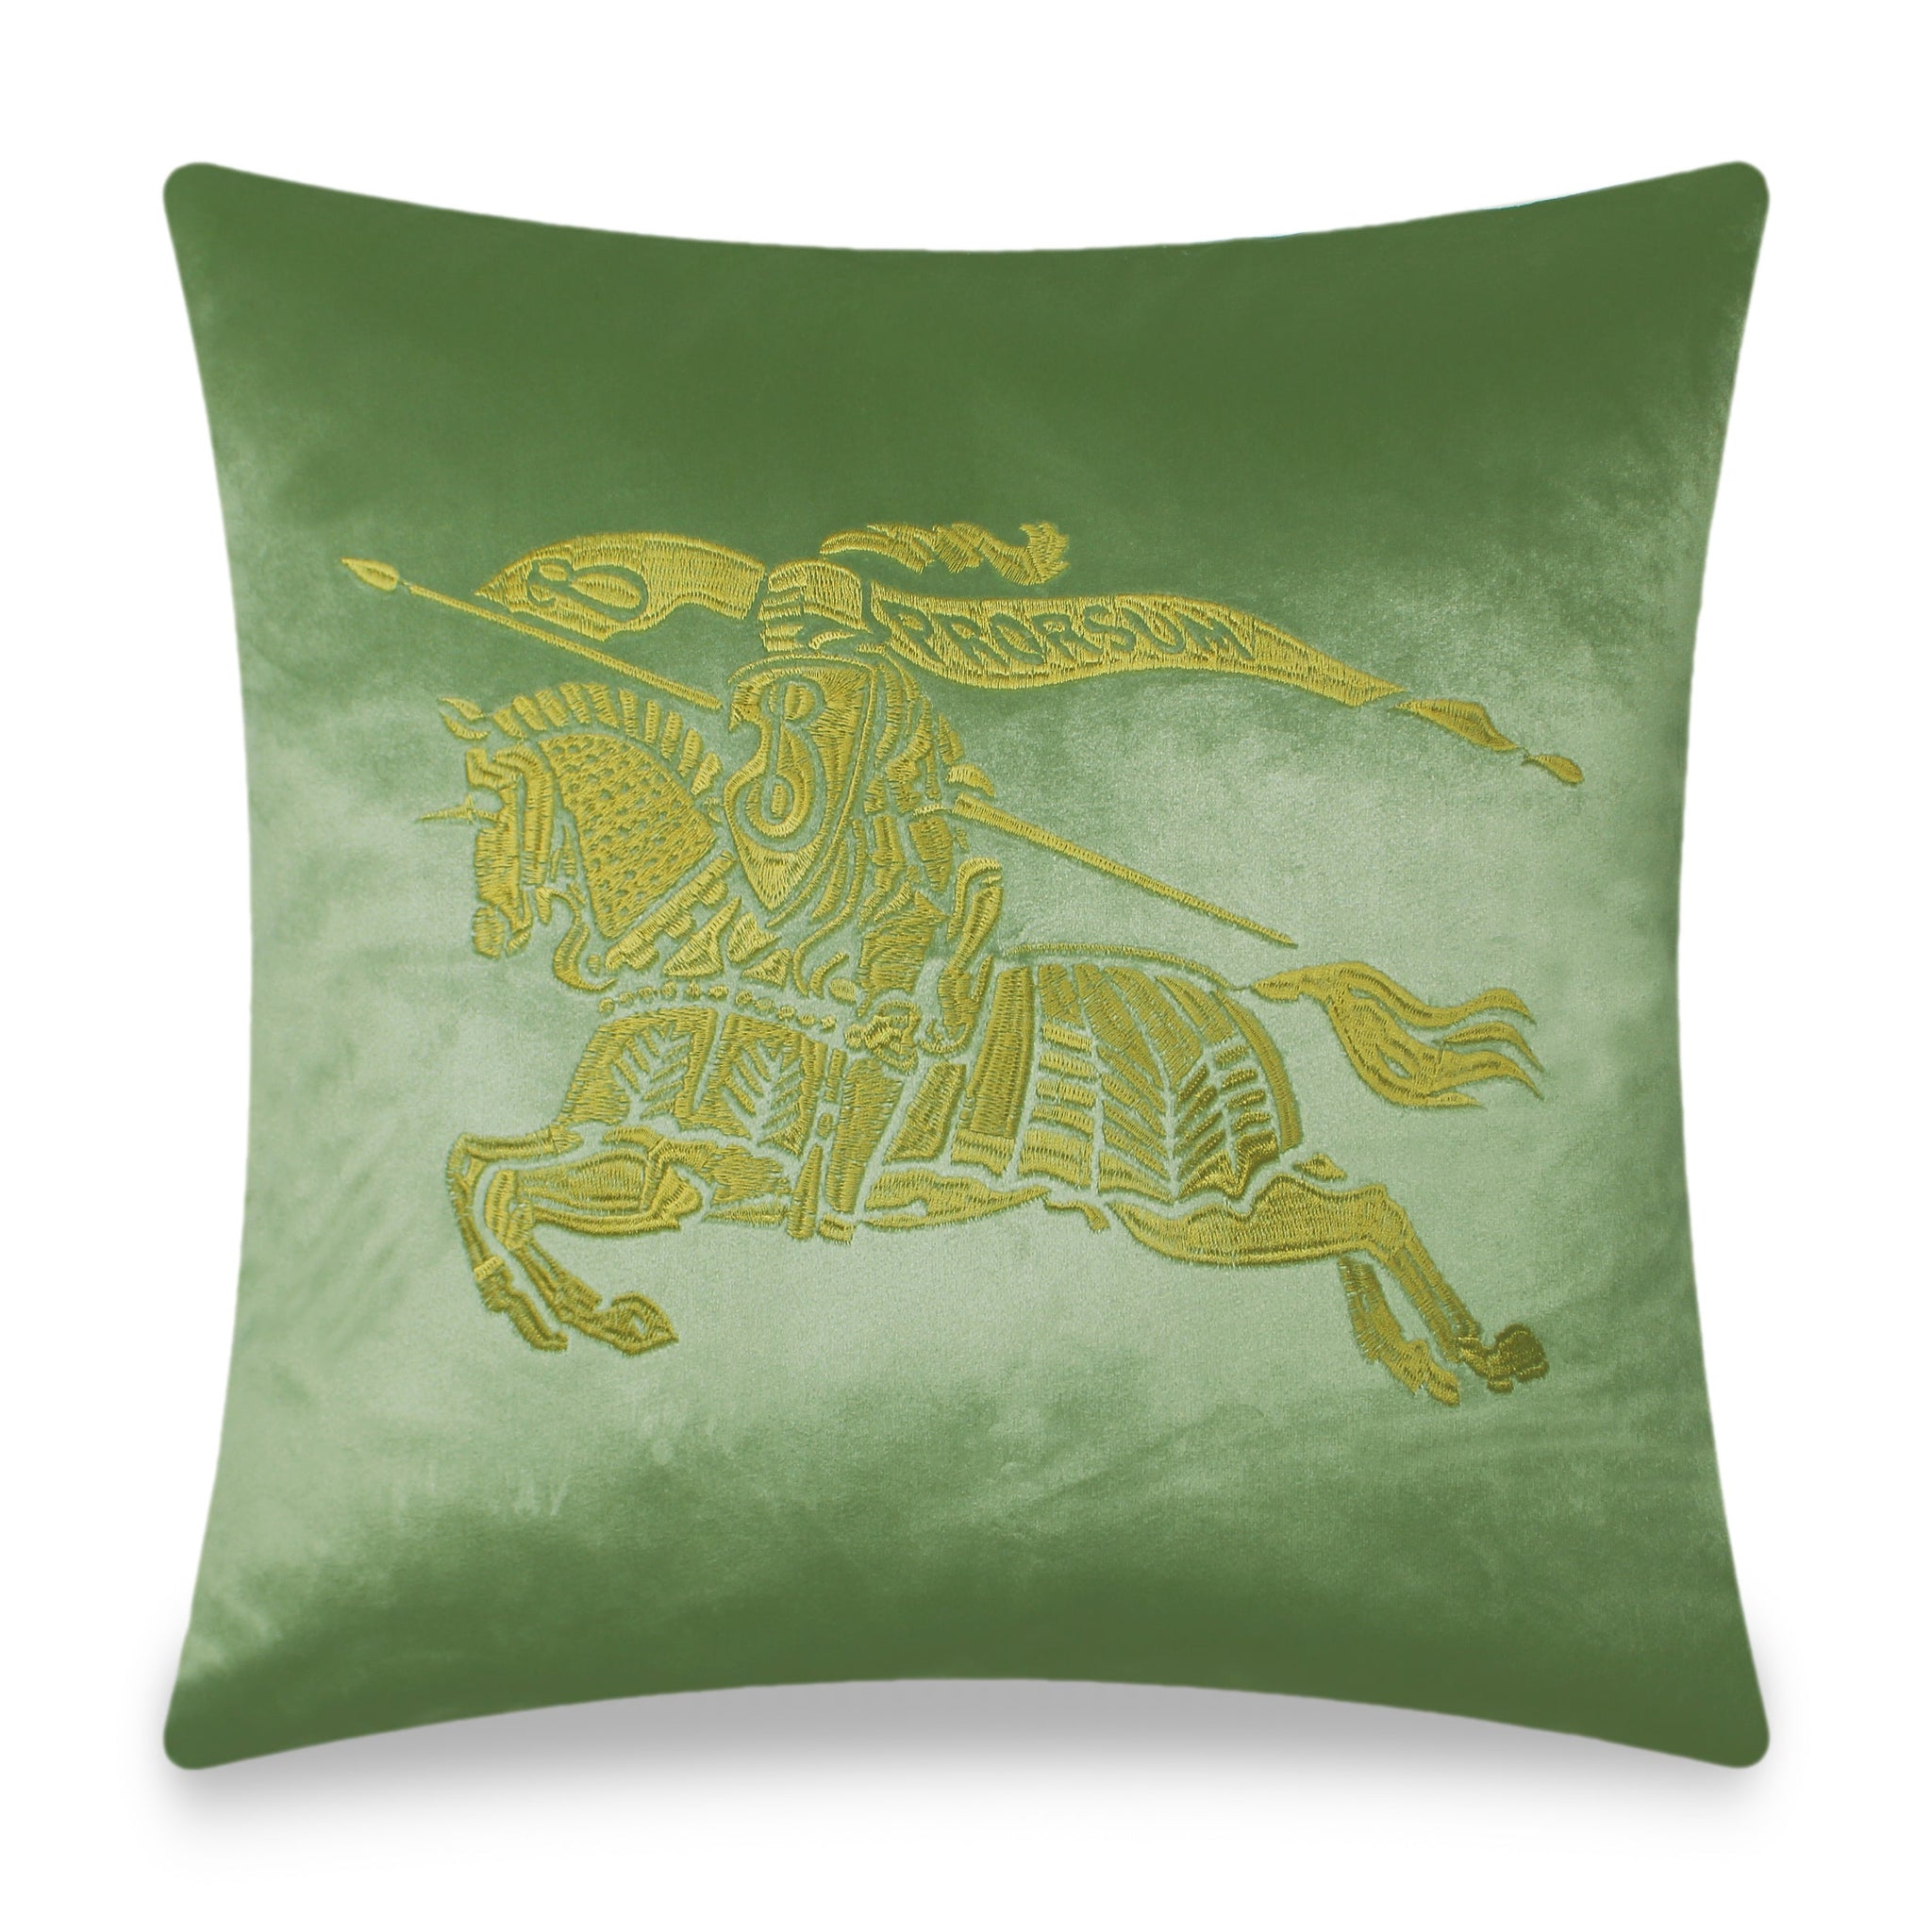 Green Pillow Cover Velvet Decorative Cushion Cover Embroidery  Iconic Horse Throw Pillow Pillow Case for Sofa Chair Bedroom Living Room 45x45 cm 18x18 Inches